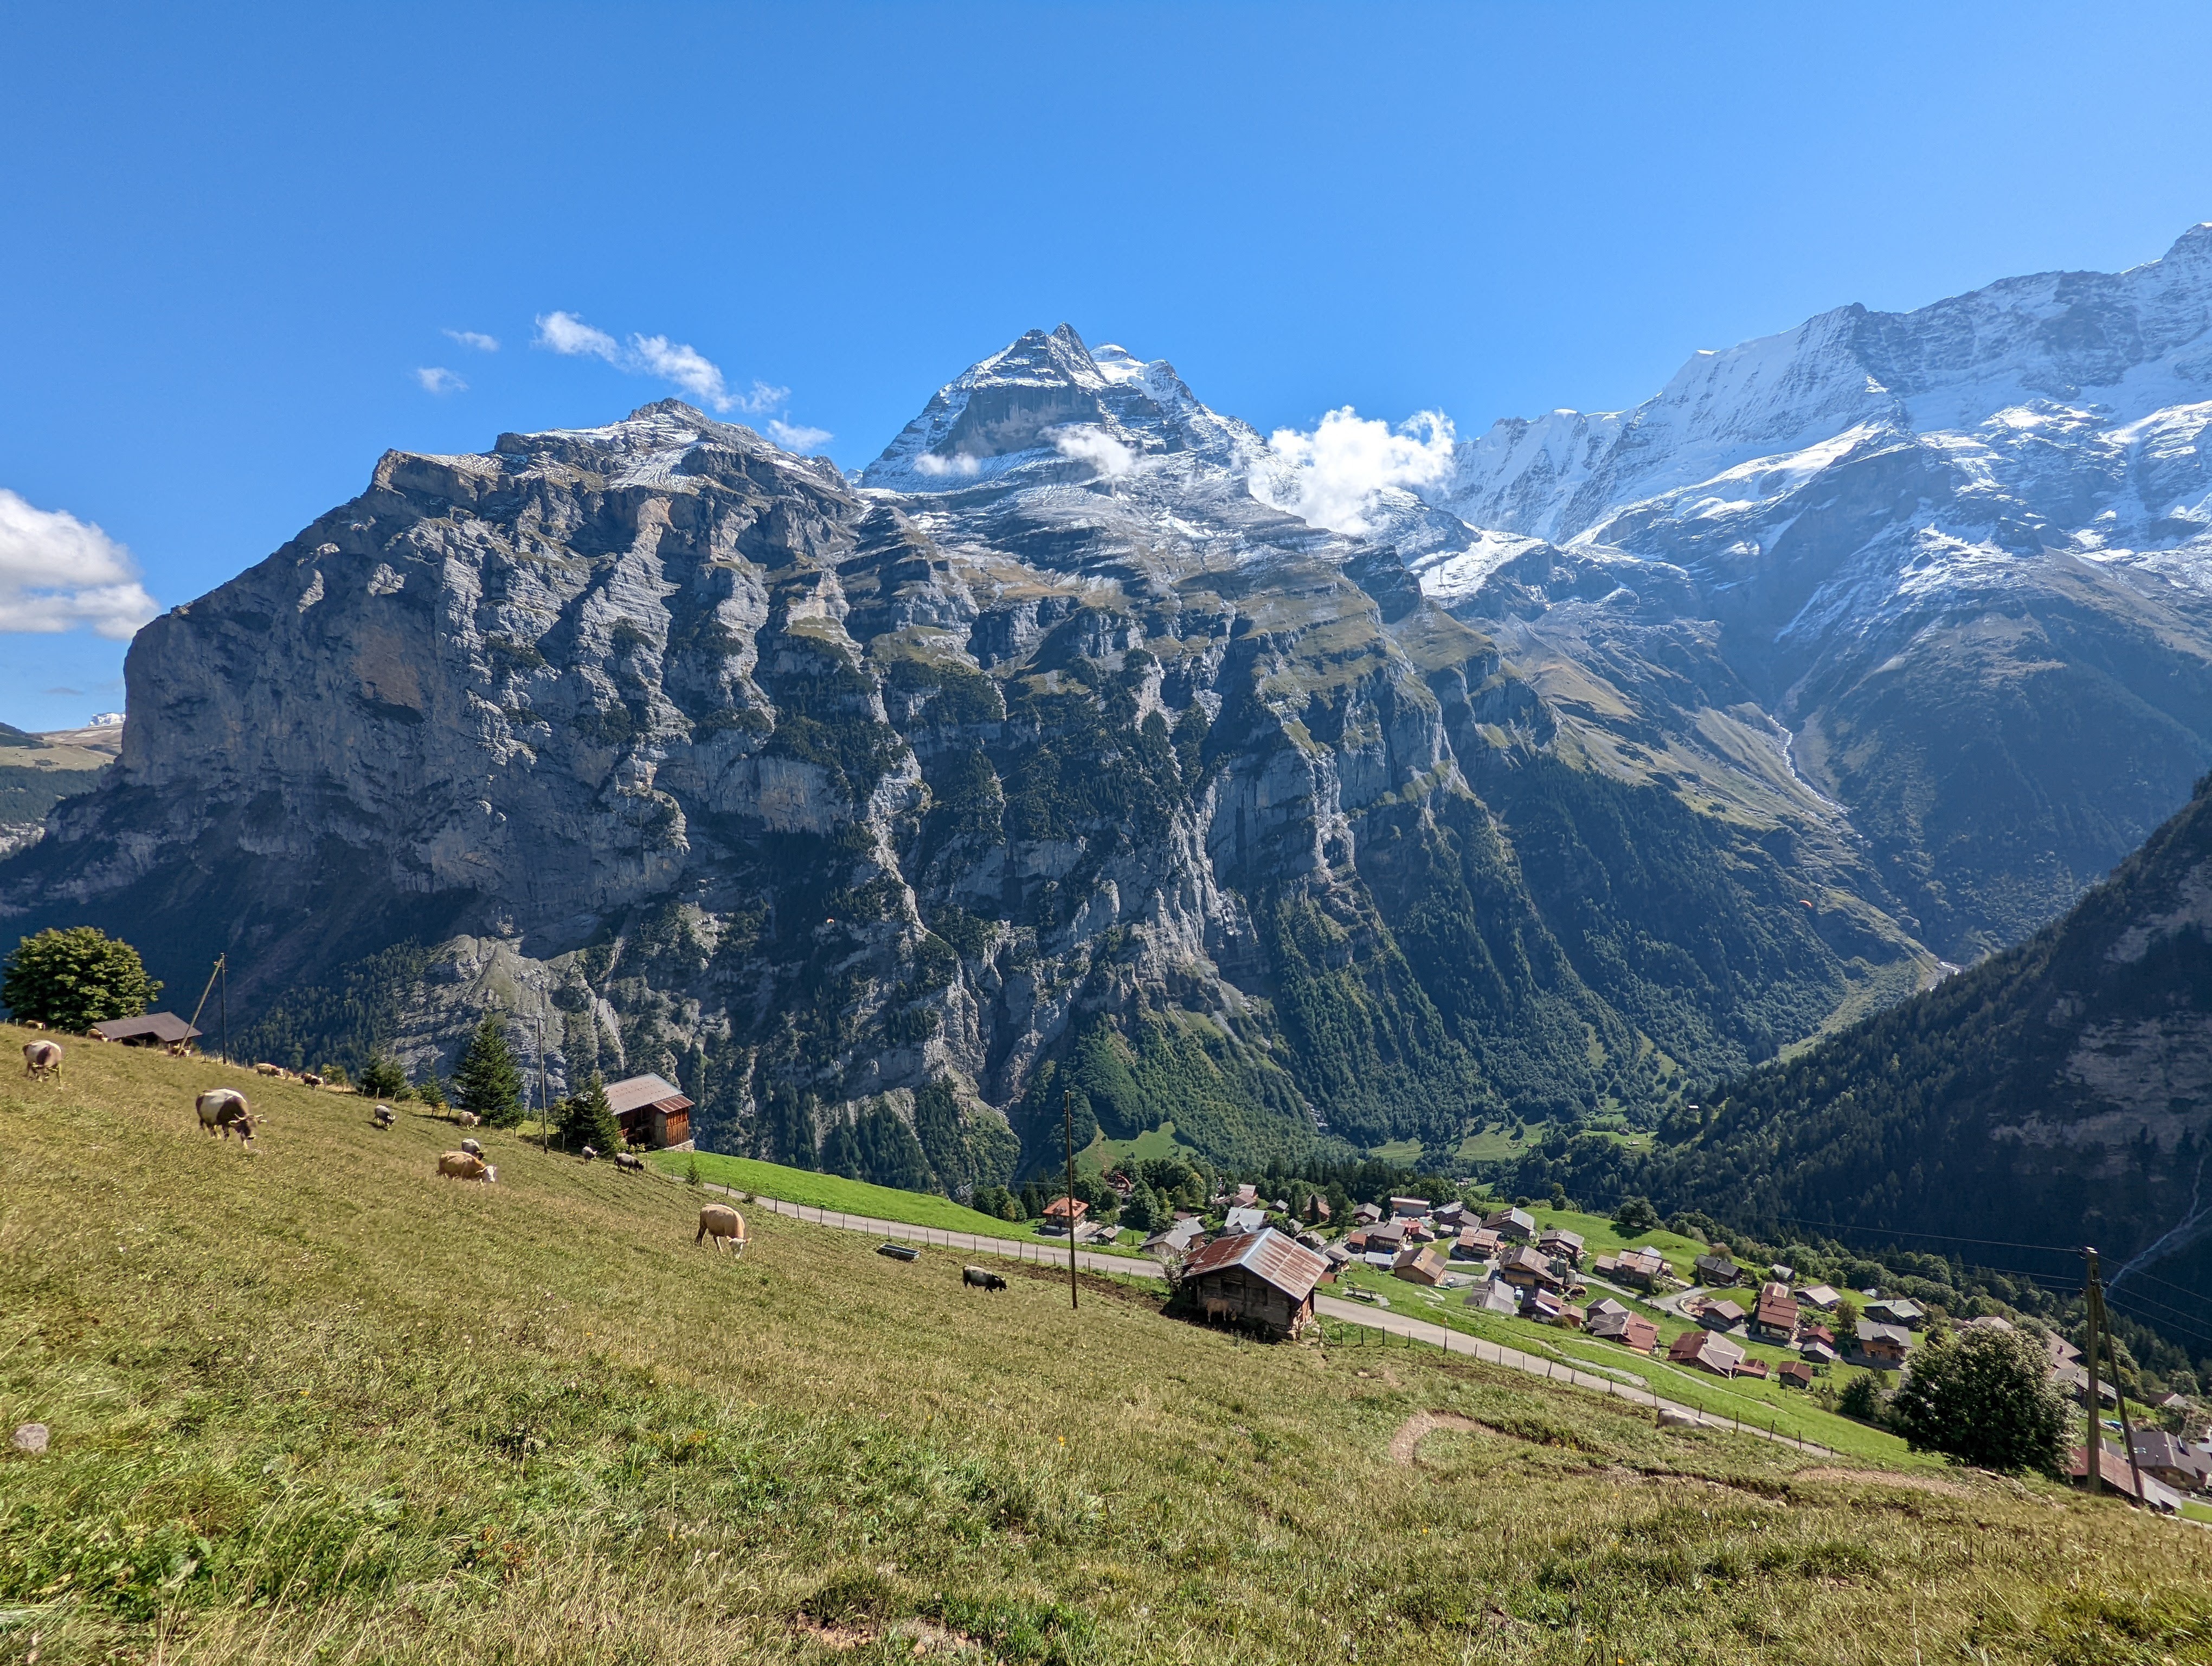 Jungfrau in back, Gimmelwald and cows in front